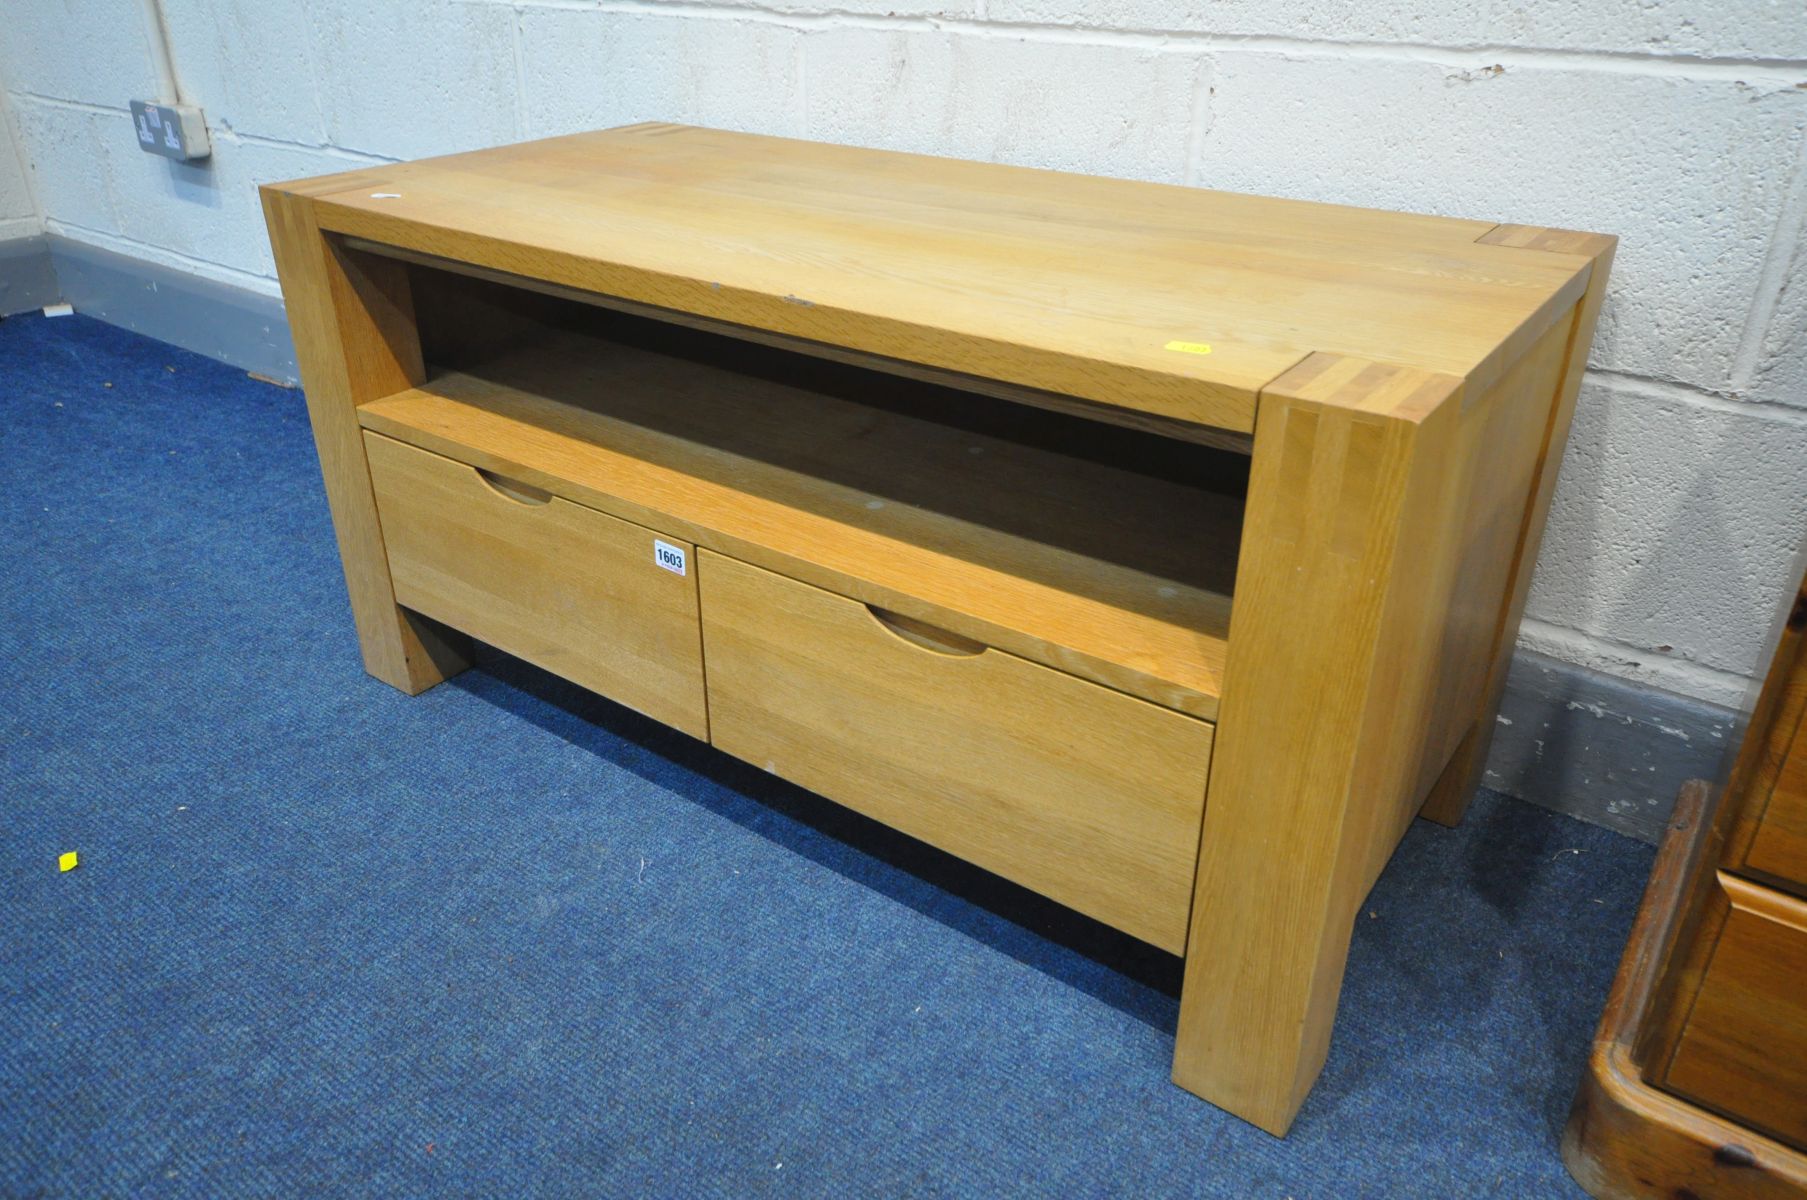 A SOLID OAK TV STAND with two drawers, width 101cm x depth 48cm x height 50cm, and a pine chest of - Image 2 of 3